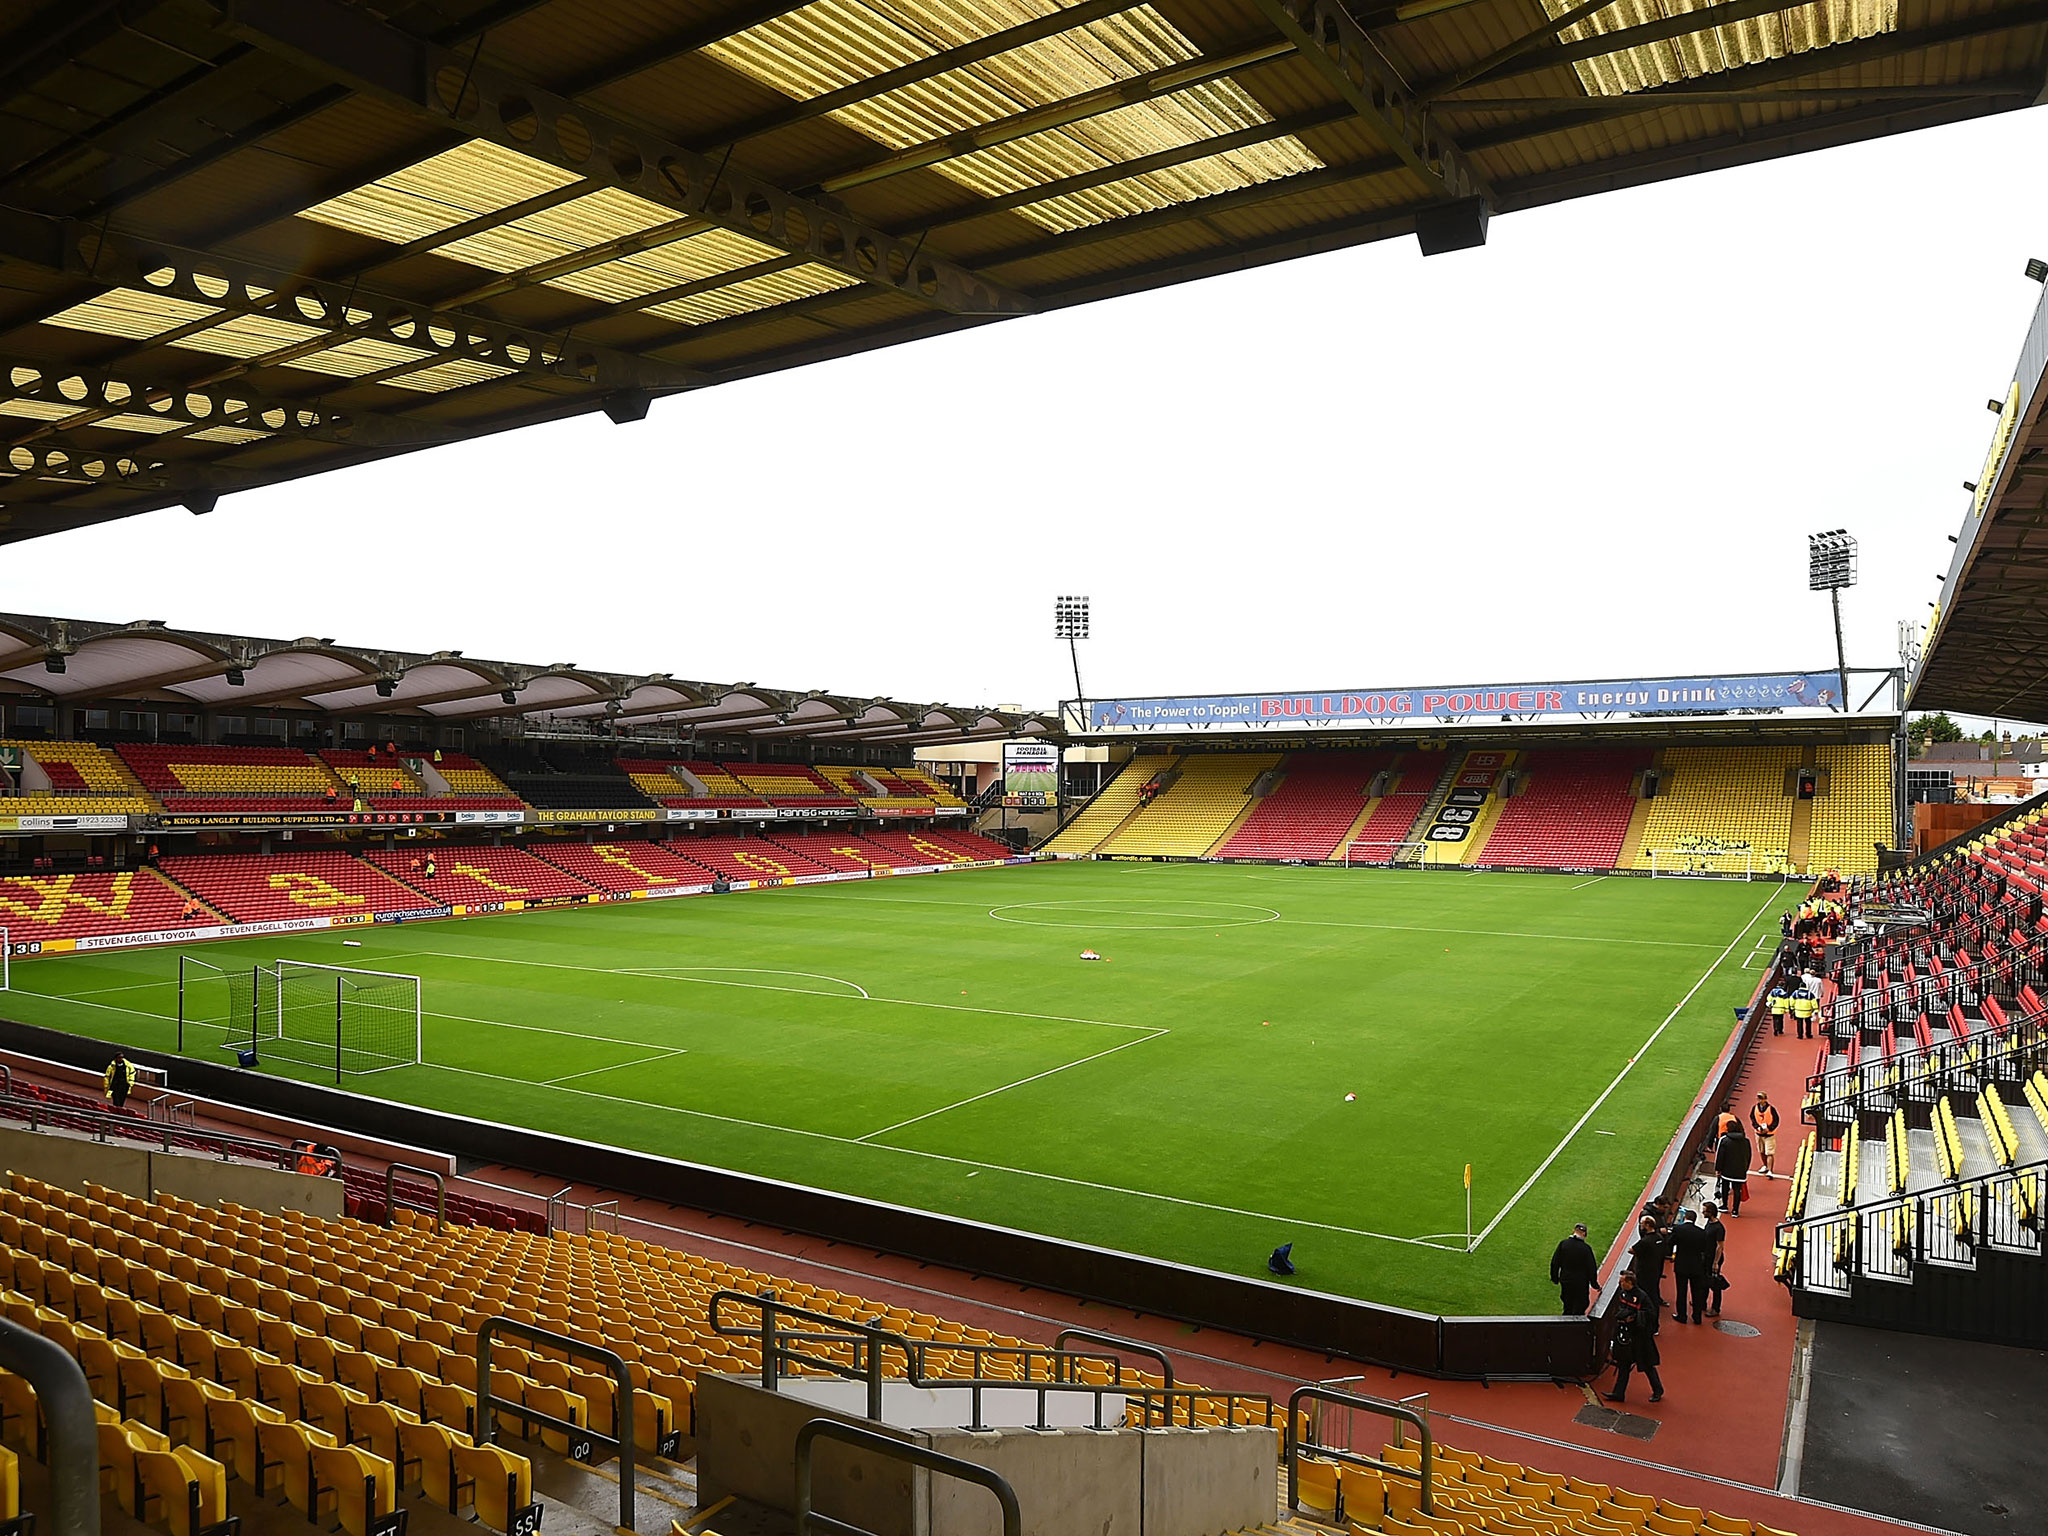 Watford VS West Ham ( BETTING TIPS, Match Preview & Expert Analysis )